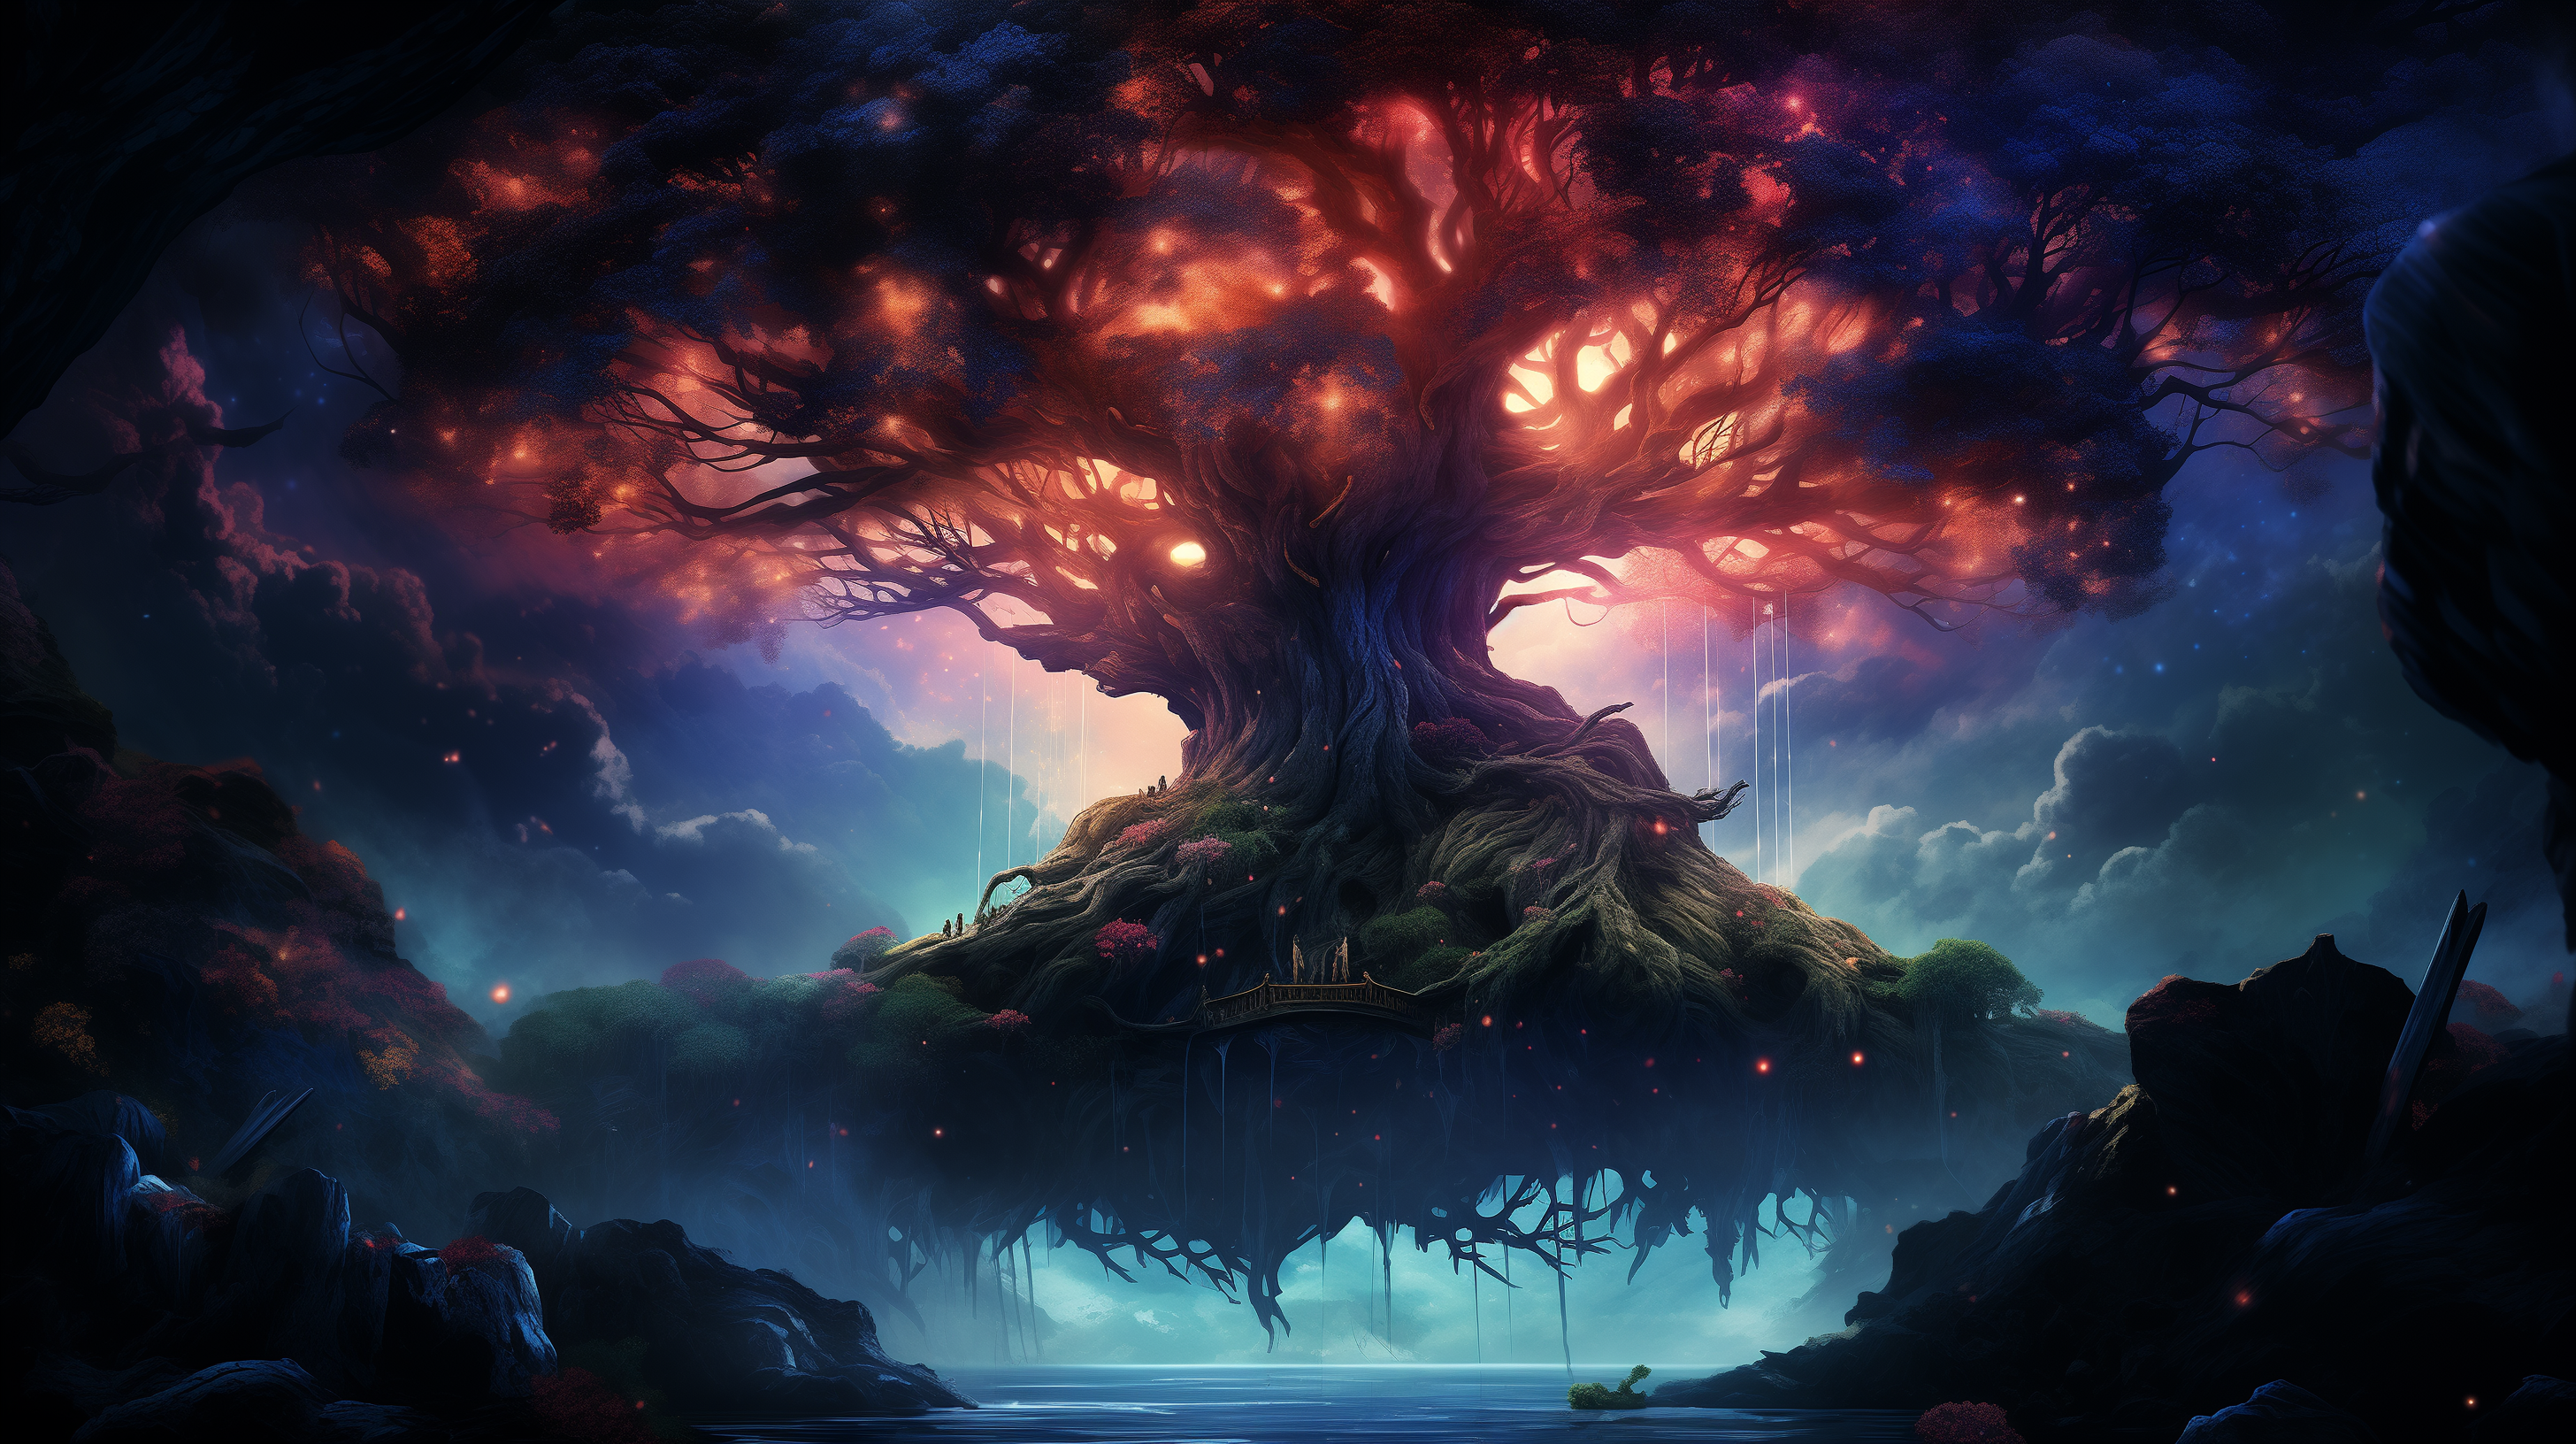 HD wallpaper of the mythical Yggdrasil tree in a mystical landscape, perfect for desktop background.